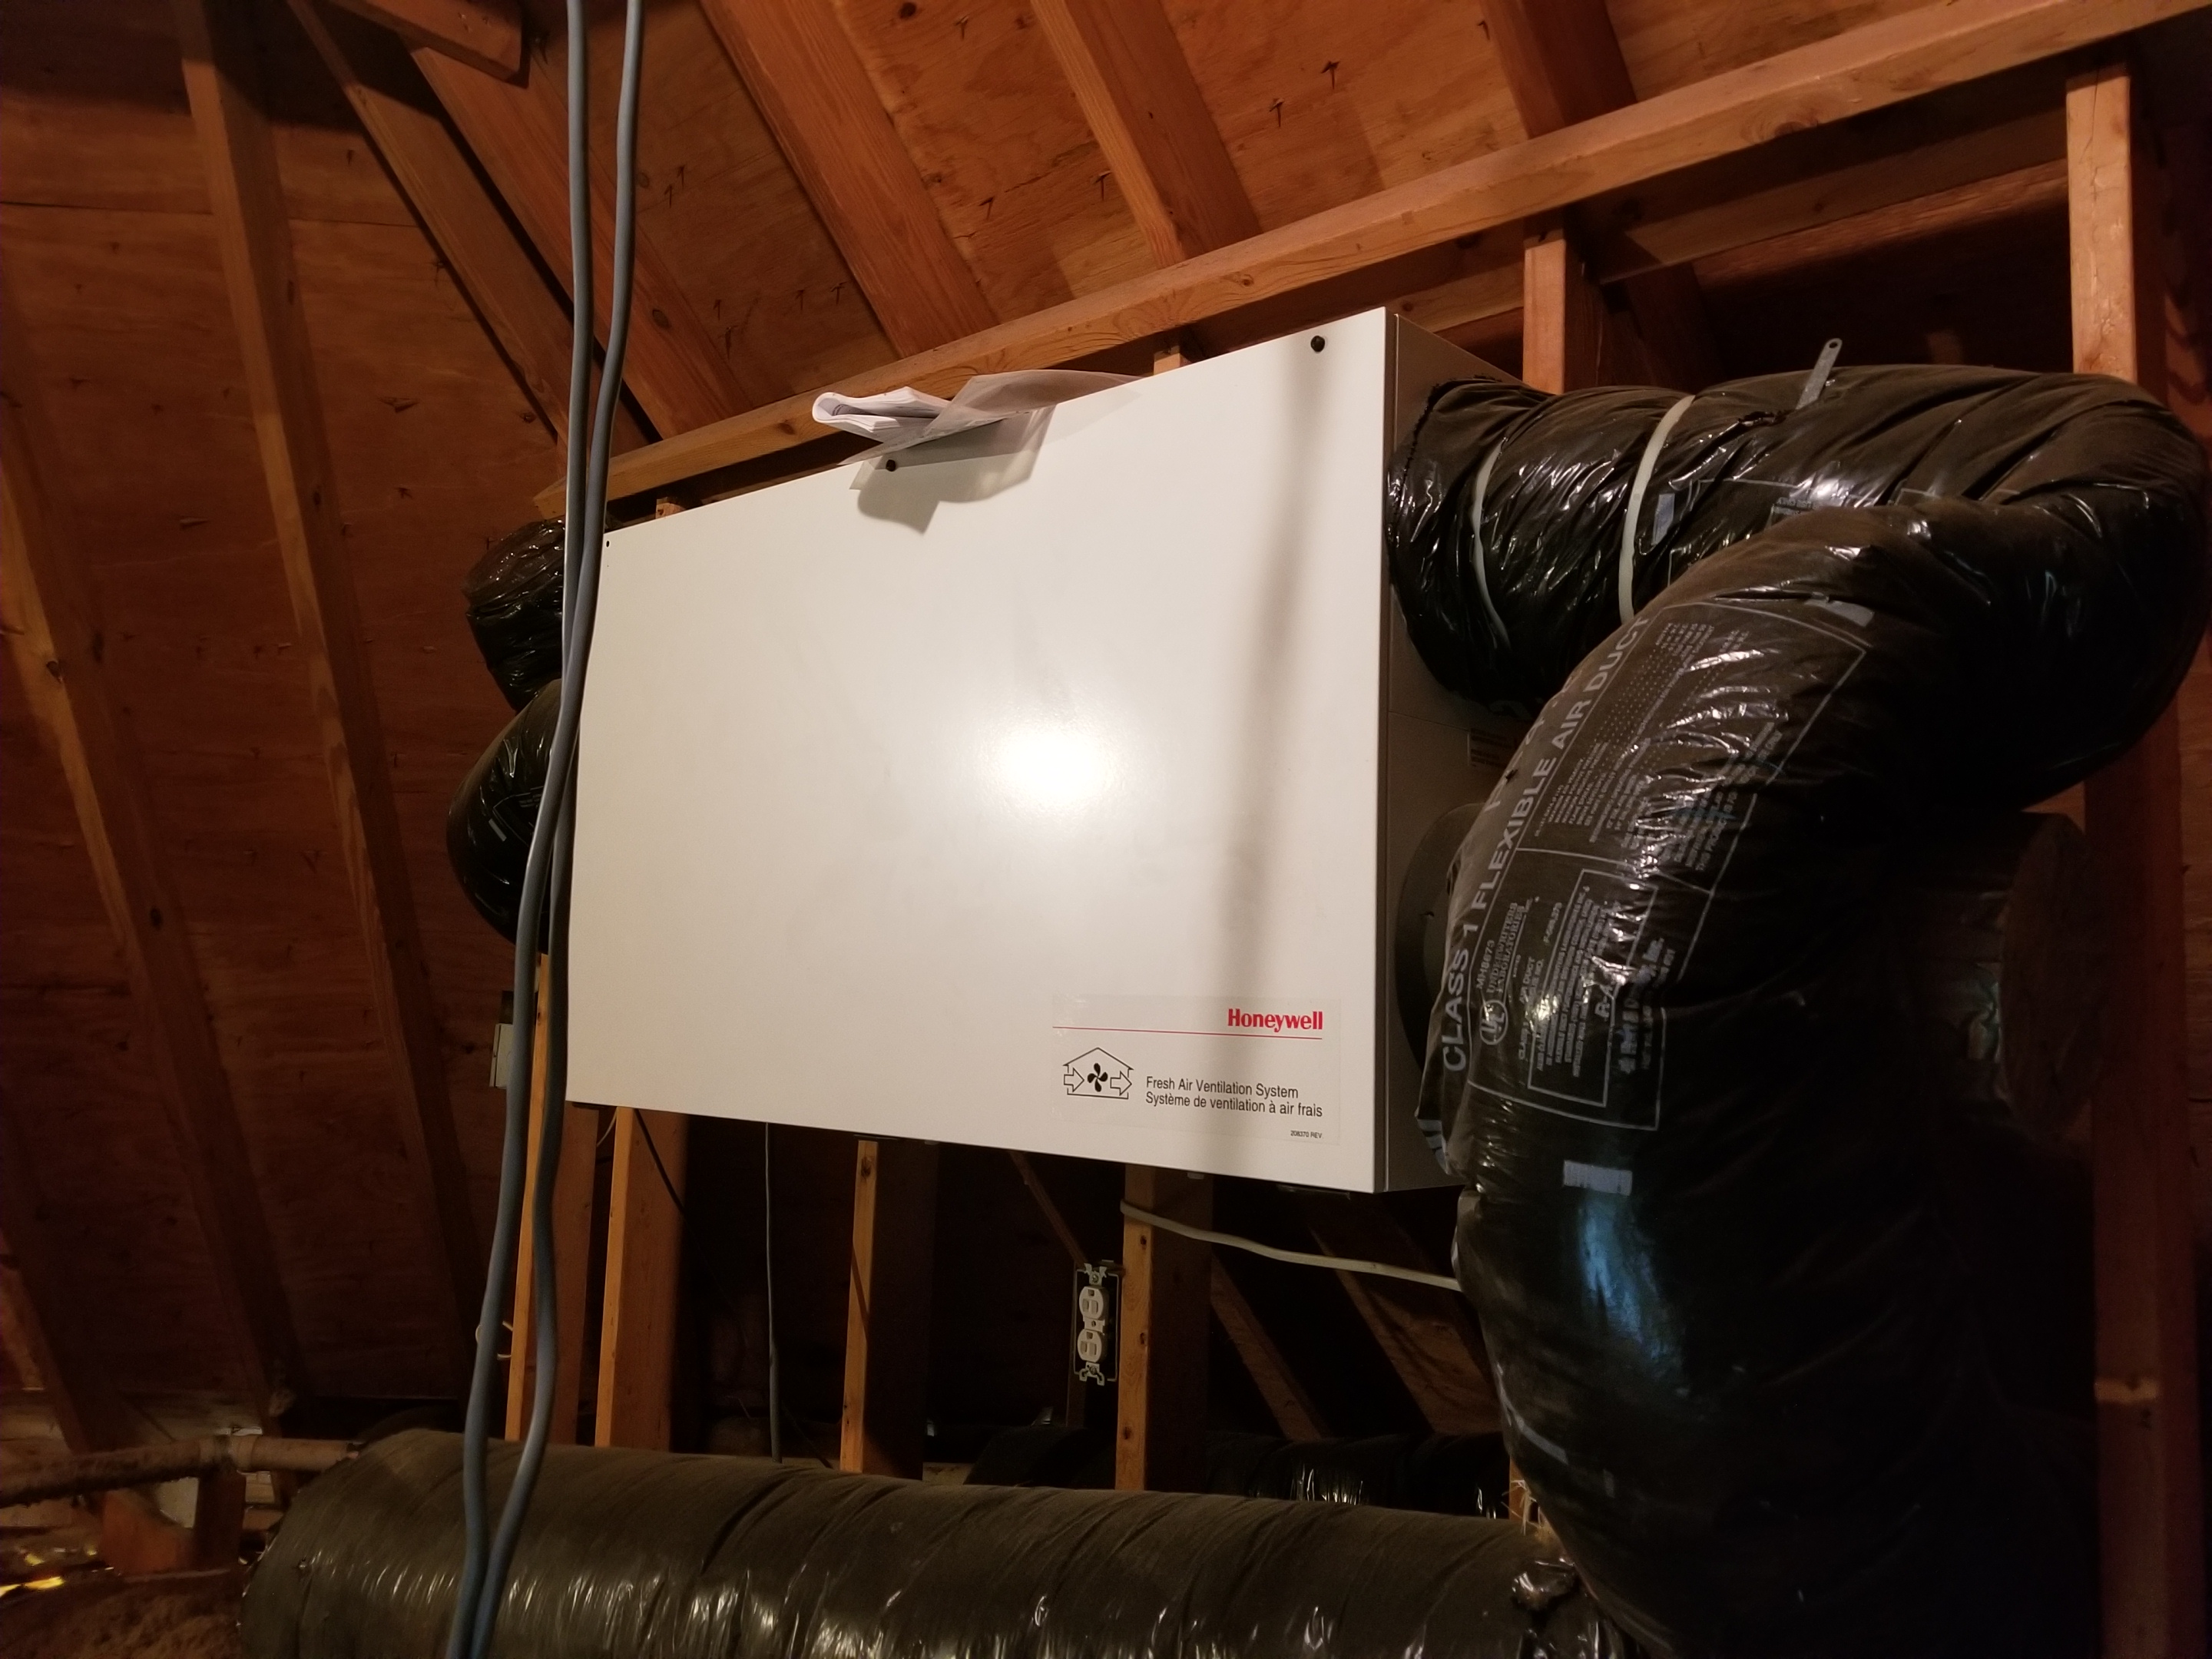 Air filtration system not connected 